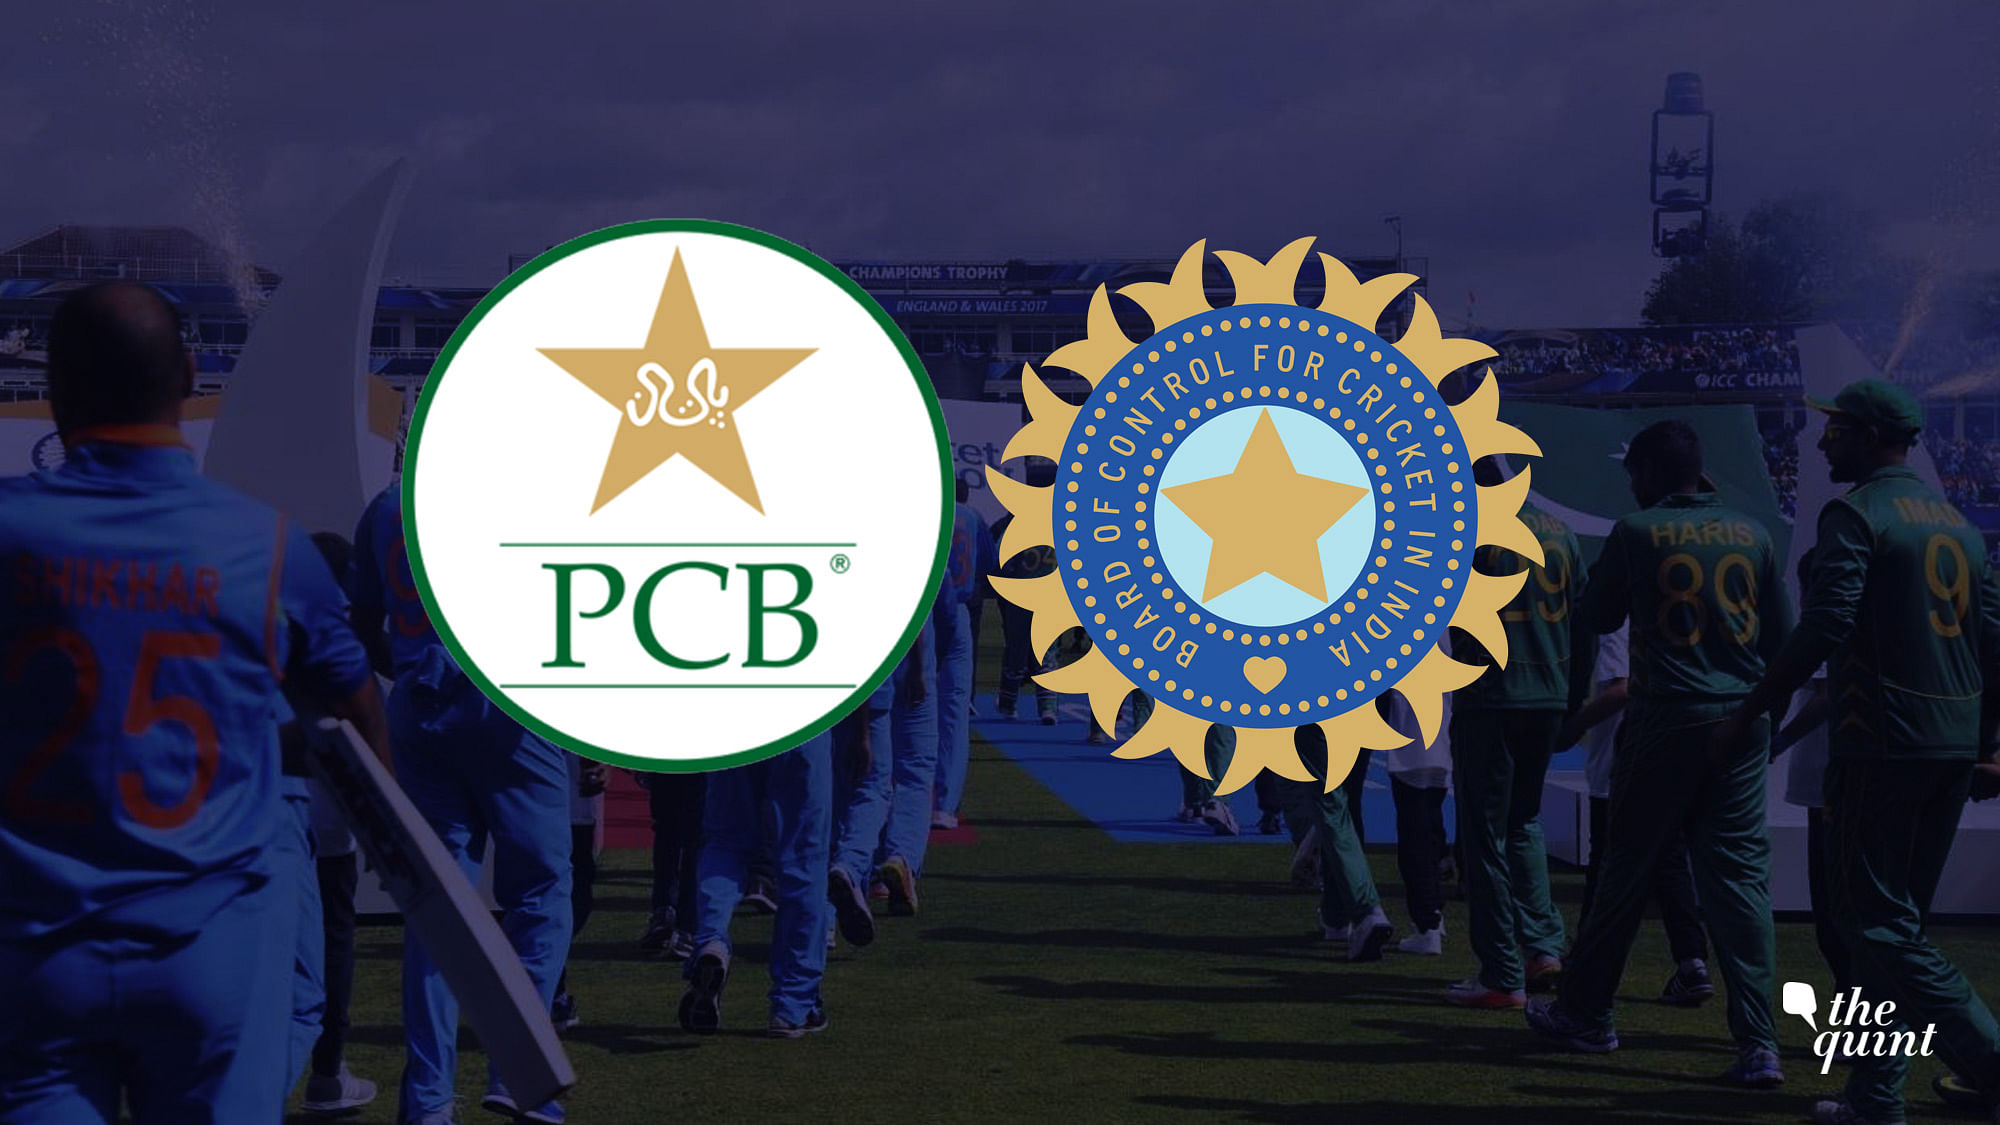 The PCB has claimed Rs 447 crore as compensation for India not honouring an alleged Memorandum of Understanding (MoU) to play cricket with Pakistan.